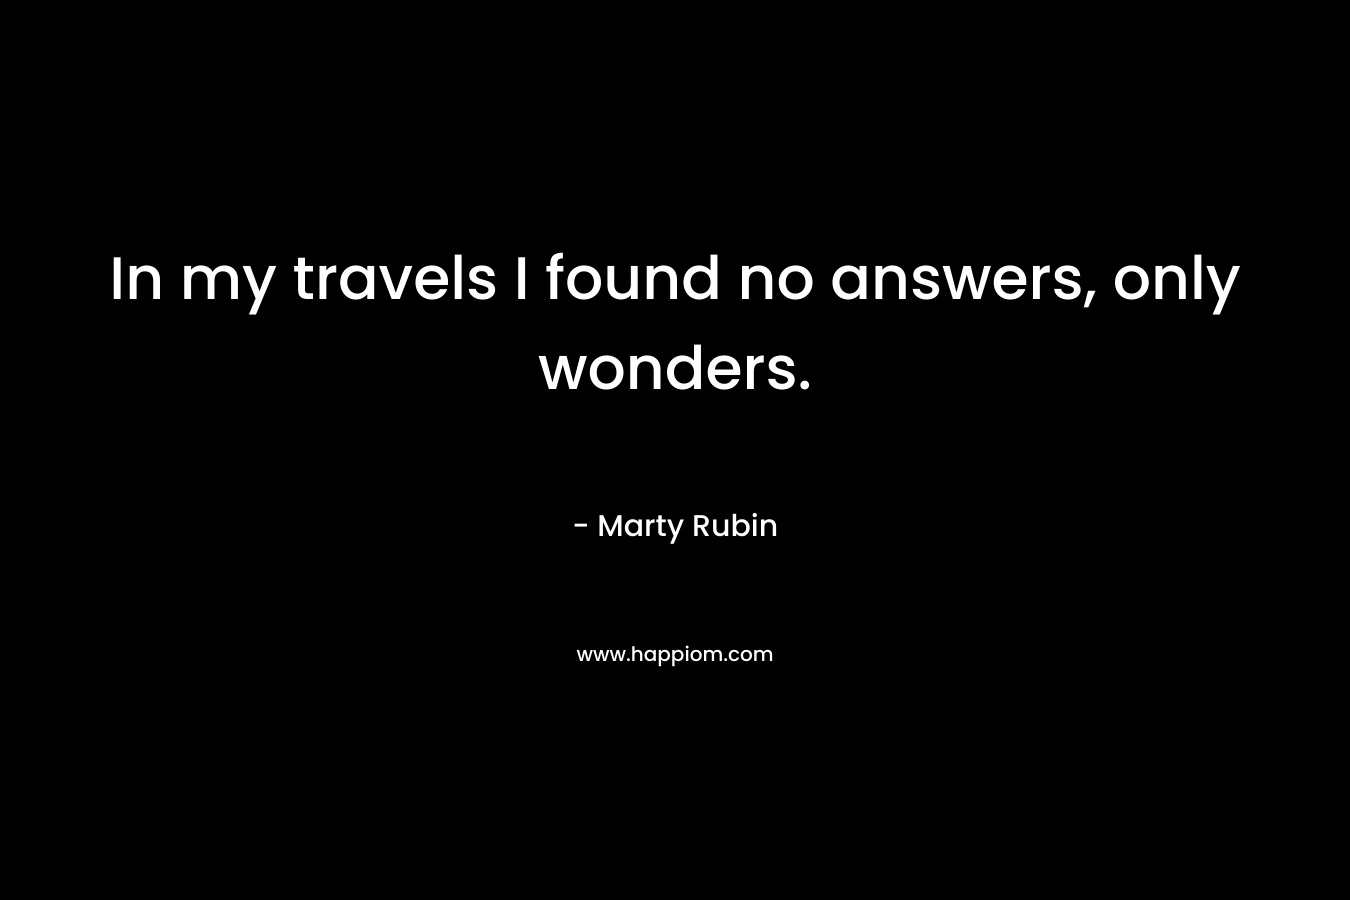 In my travels I found no answers, only wonders. – Marty Rubin